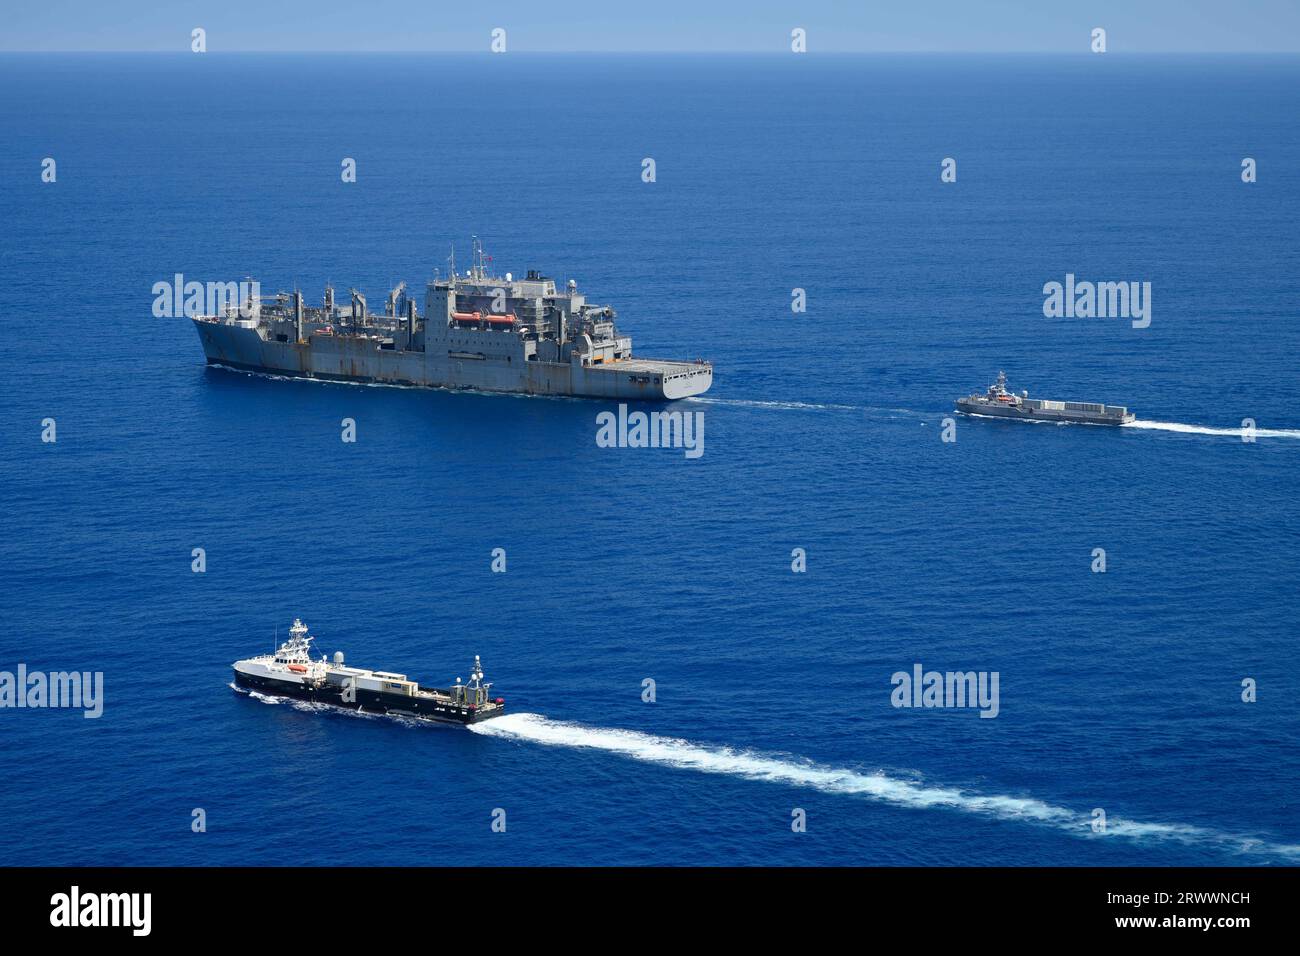 Pacific Ocean, United States. 16 September, 2023. The U.S Navy unmanned surface vessel USV Ranger, right, approaches for replenishment-at-sea with the Lewis and Clark-class dry cargo and ammunition ship USNS Charles Drew as the sister ship USV Mariner, bottom, follows along during Integrated Battle Problem 23.2, September 16, 2023 on the Pacific Ocean. The Pacific Fleet exercise is to test, develop and evaluate the integration of unmanned platforms into fleet operations.  Credit: MC2 Jesse Monford/US Army/Alamy Live News Stock Photo